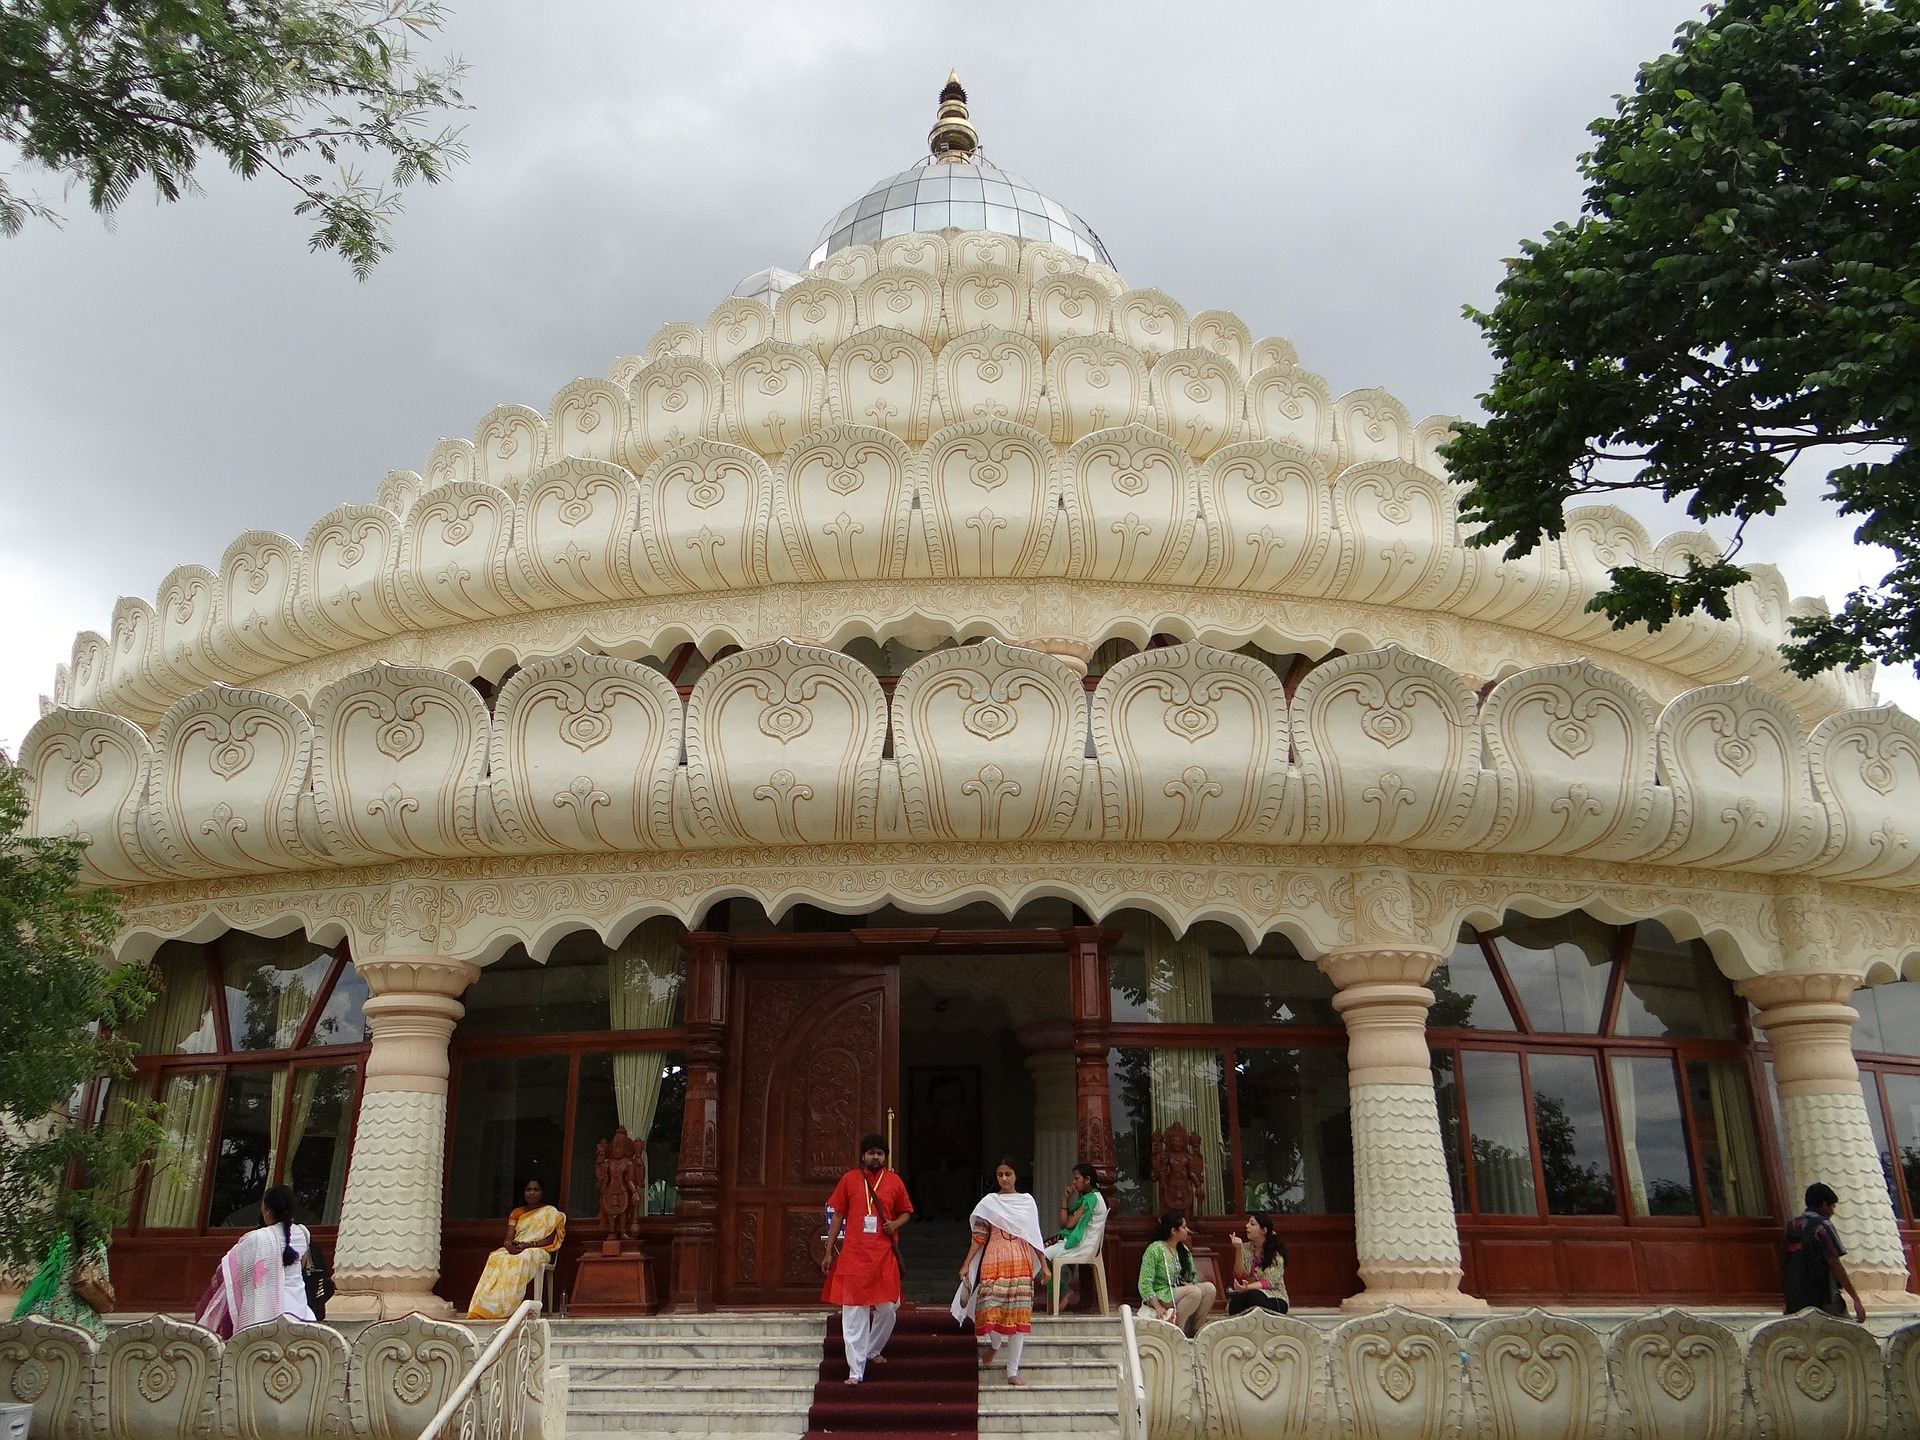 Exploring India: Things to Do in Bangalore